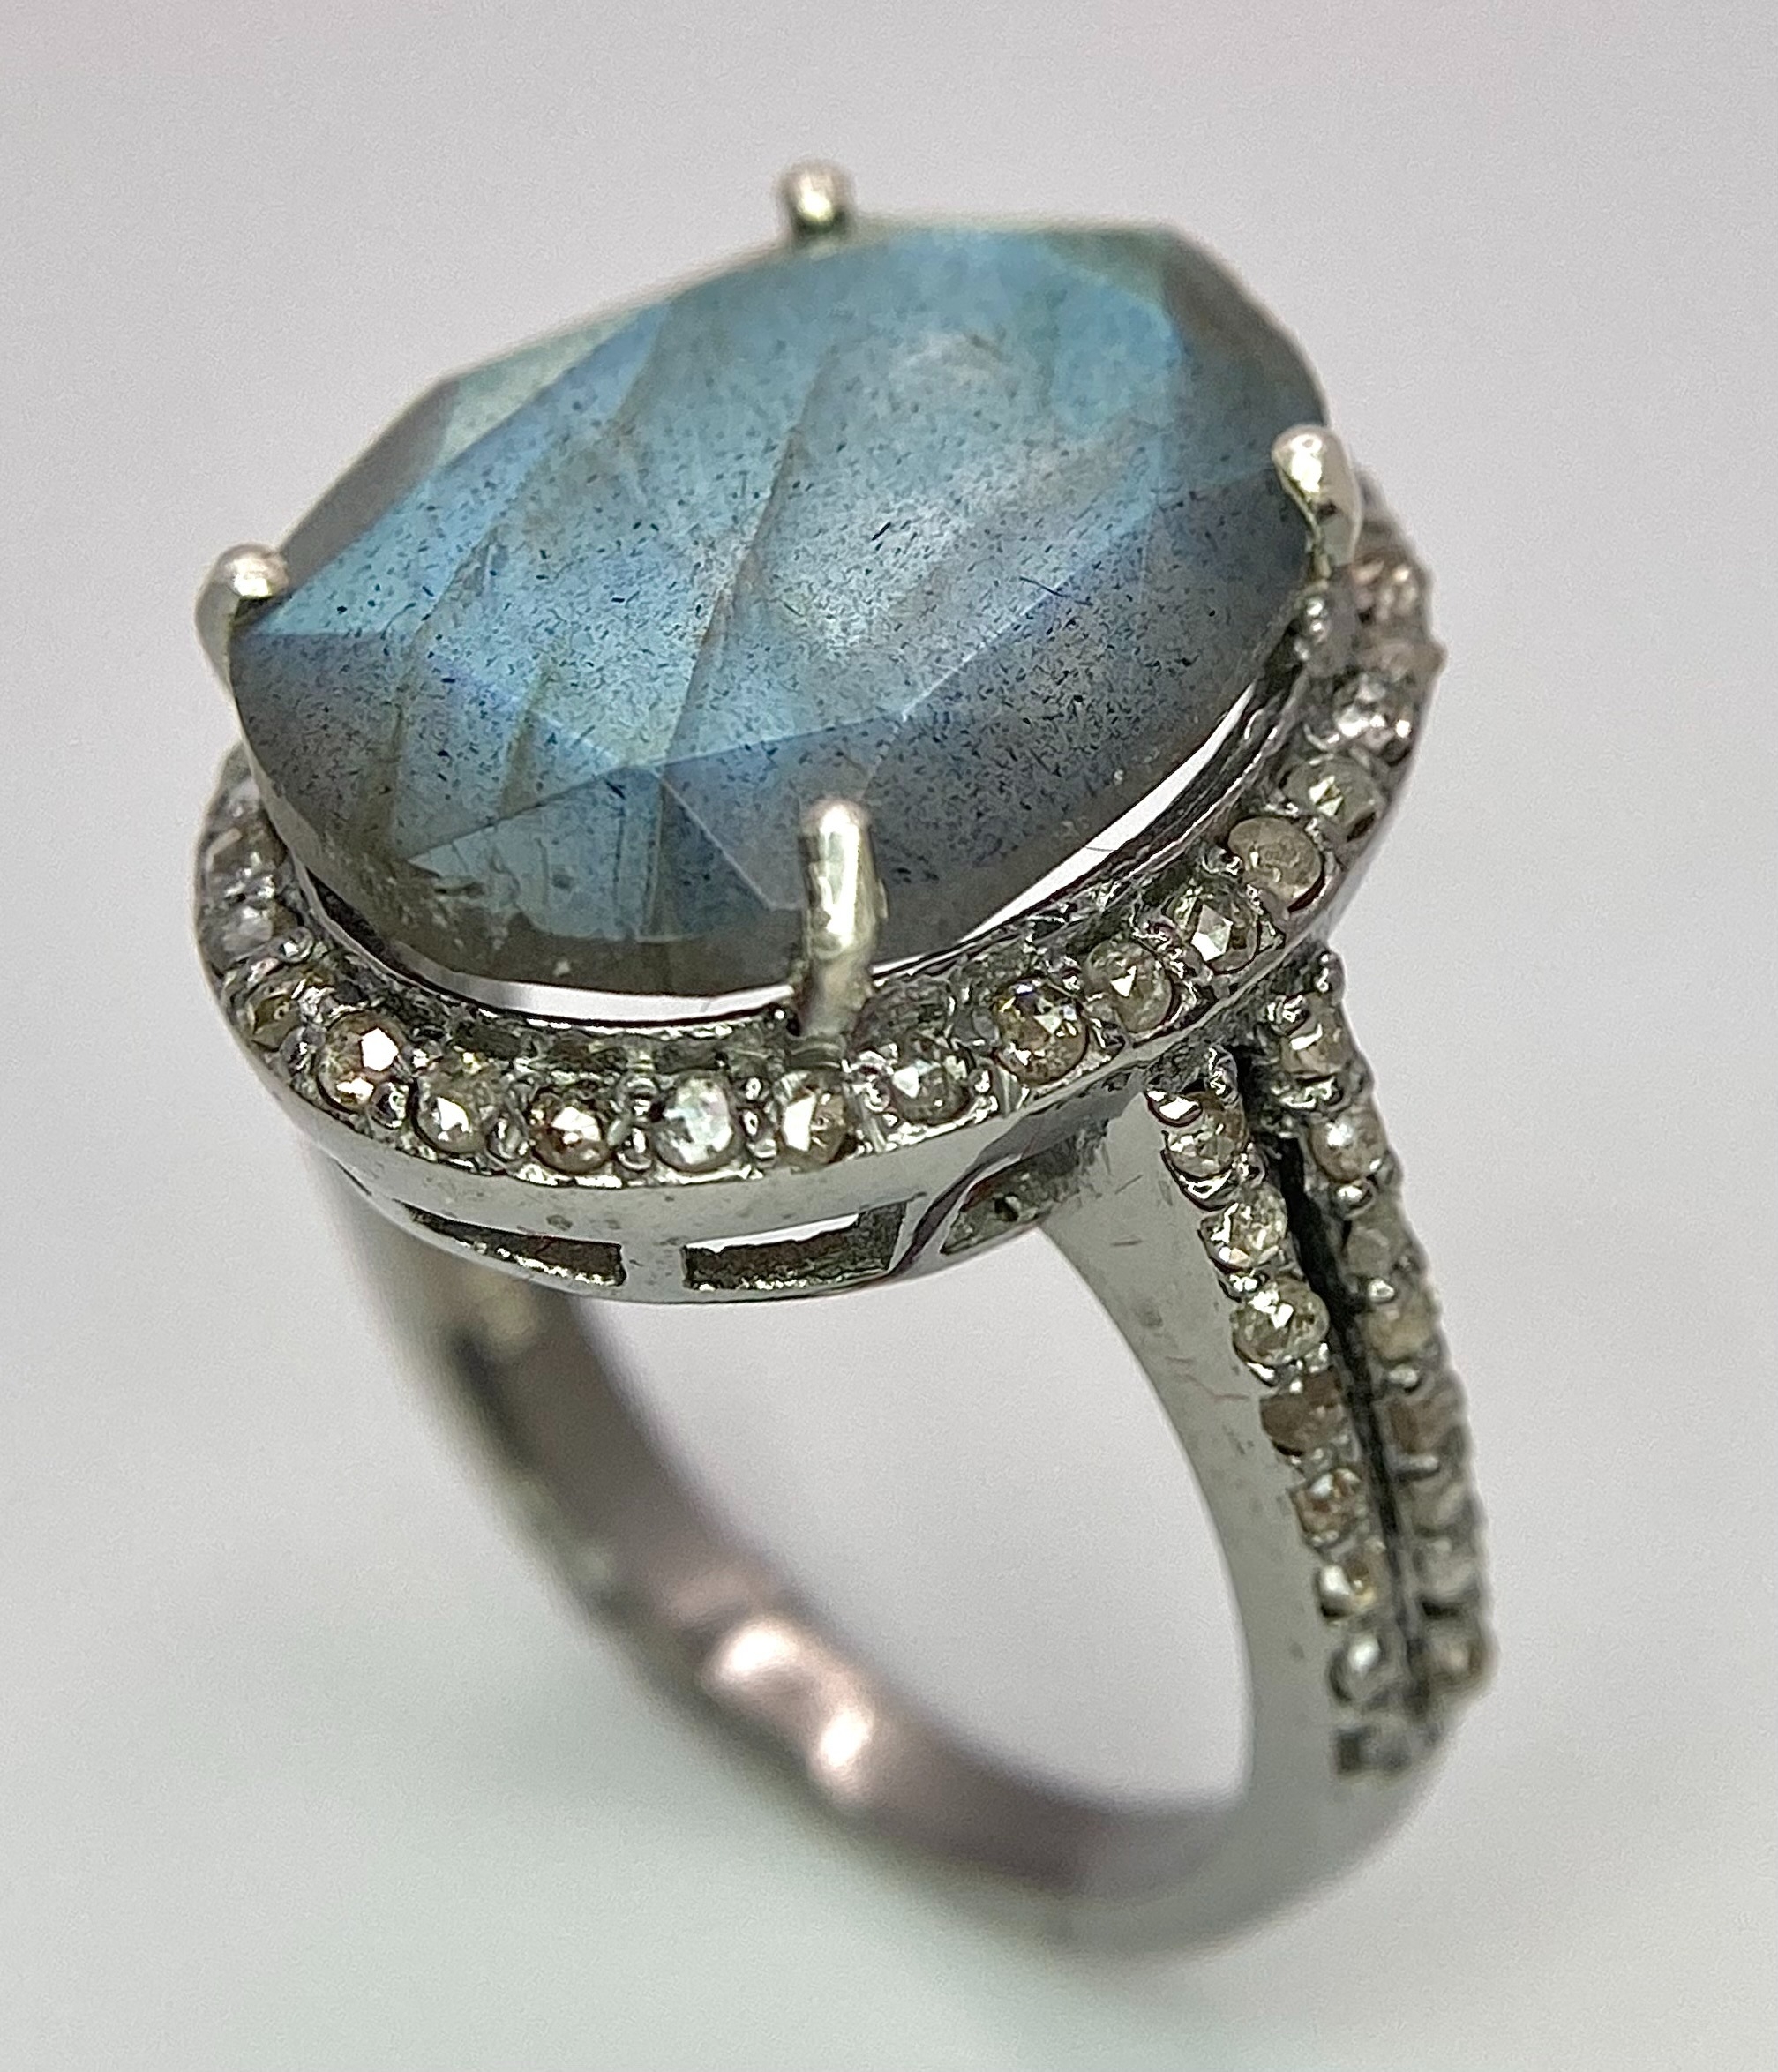 A 6.5ct Labradorite and Rose cut Diamond Ring. Diamonds- 0.60ctw. Size N. Comes with a - Image 3 of 7